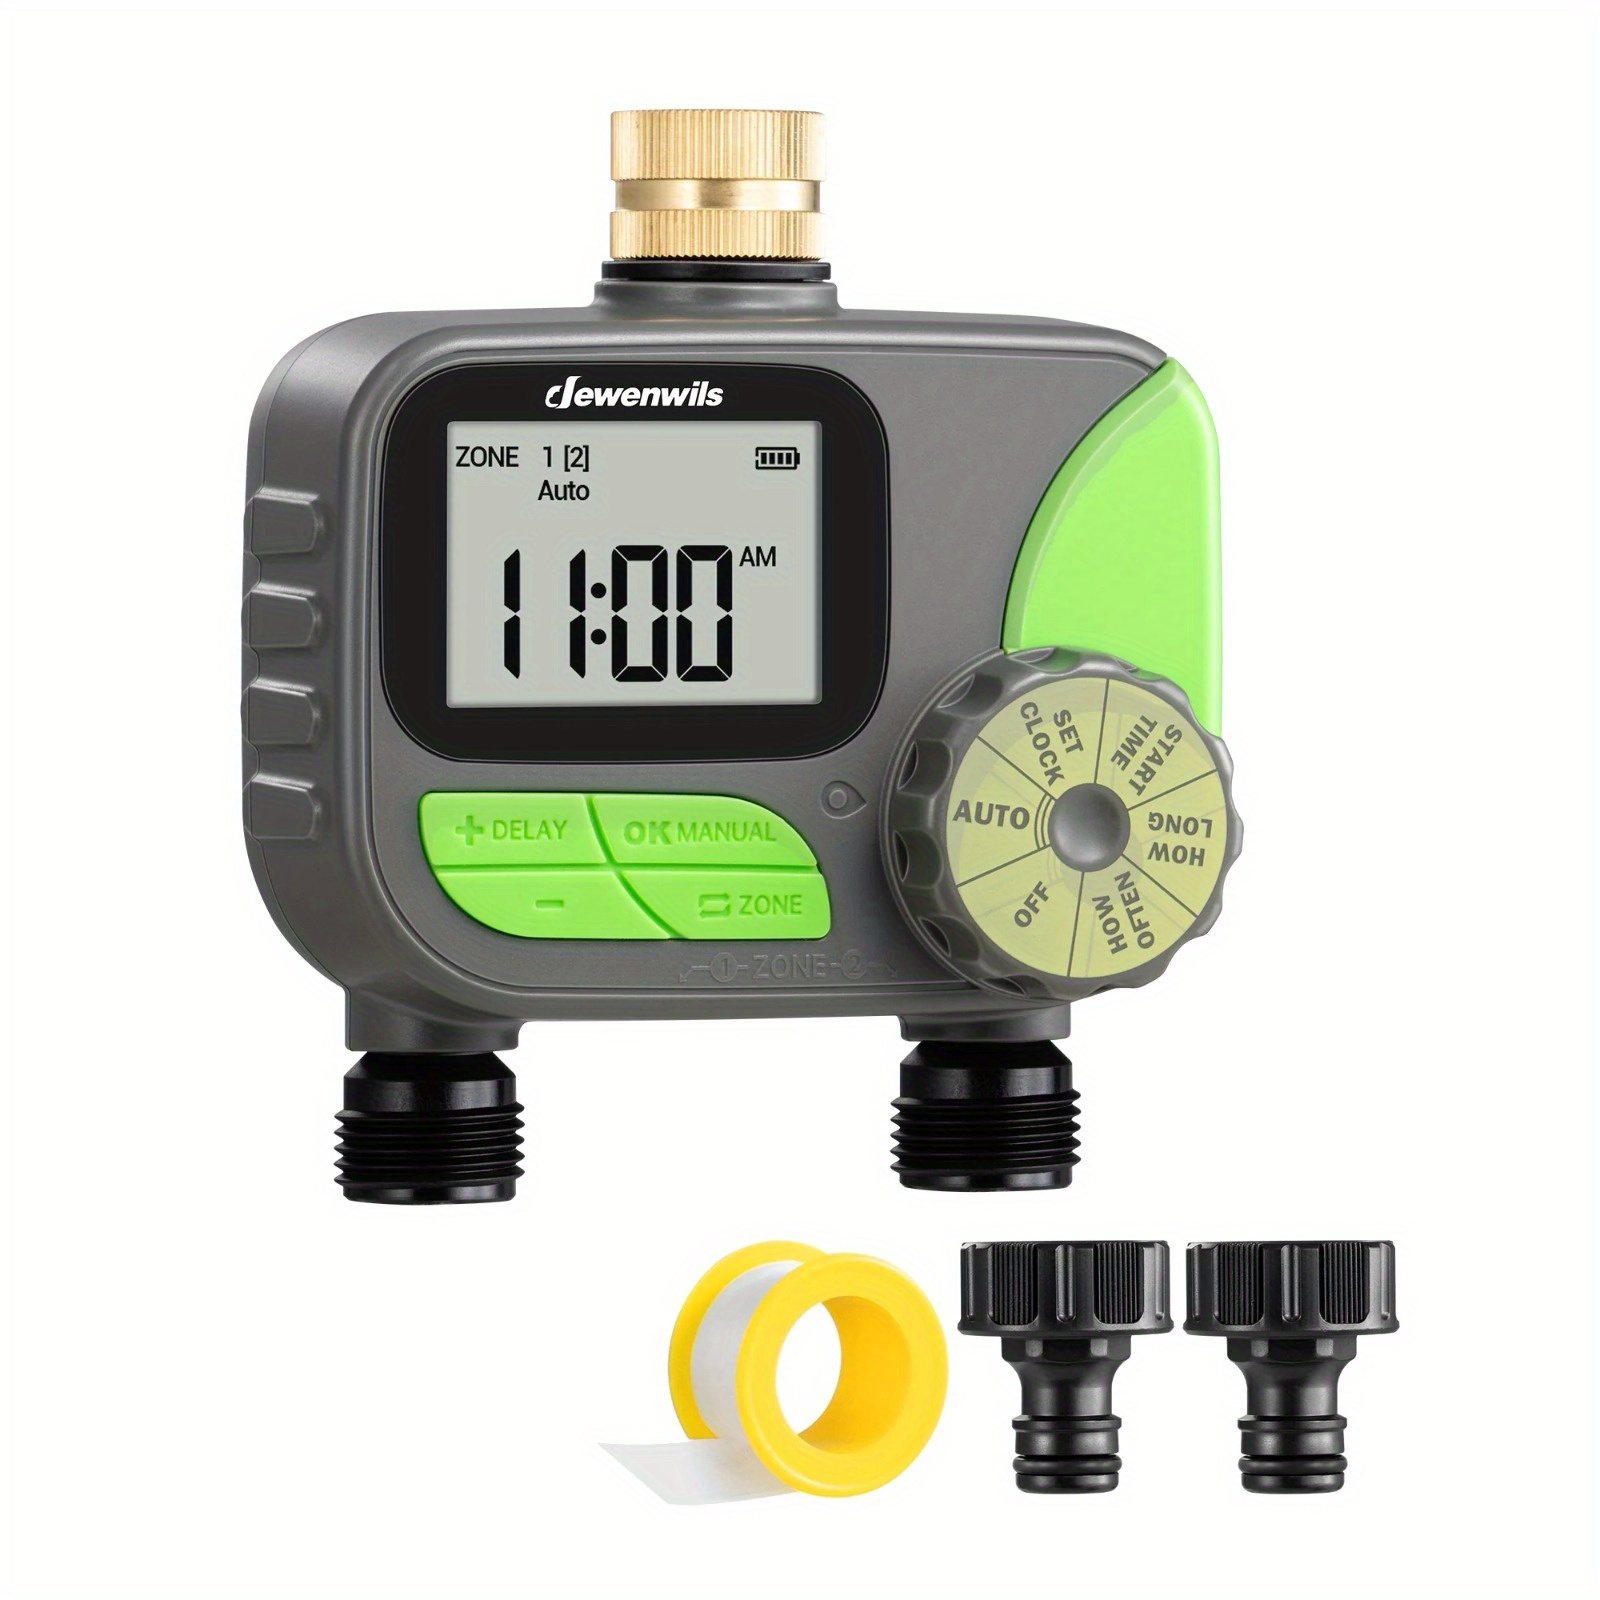 

Dewenwils 2 Zone Sprinkler Watering Timer For Hose With Rain Delay/manual For Yard Lawn